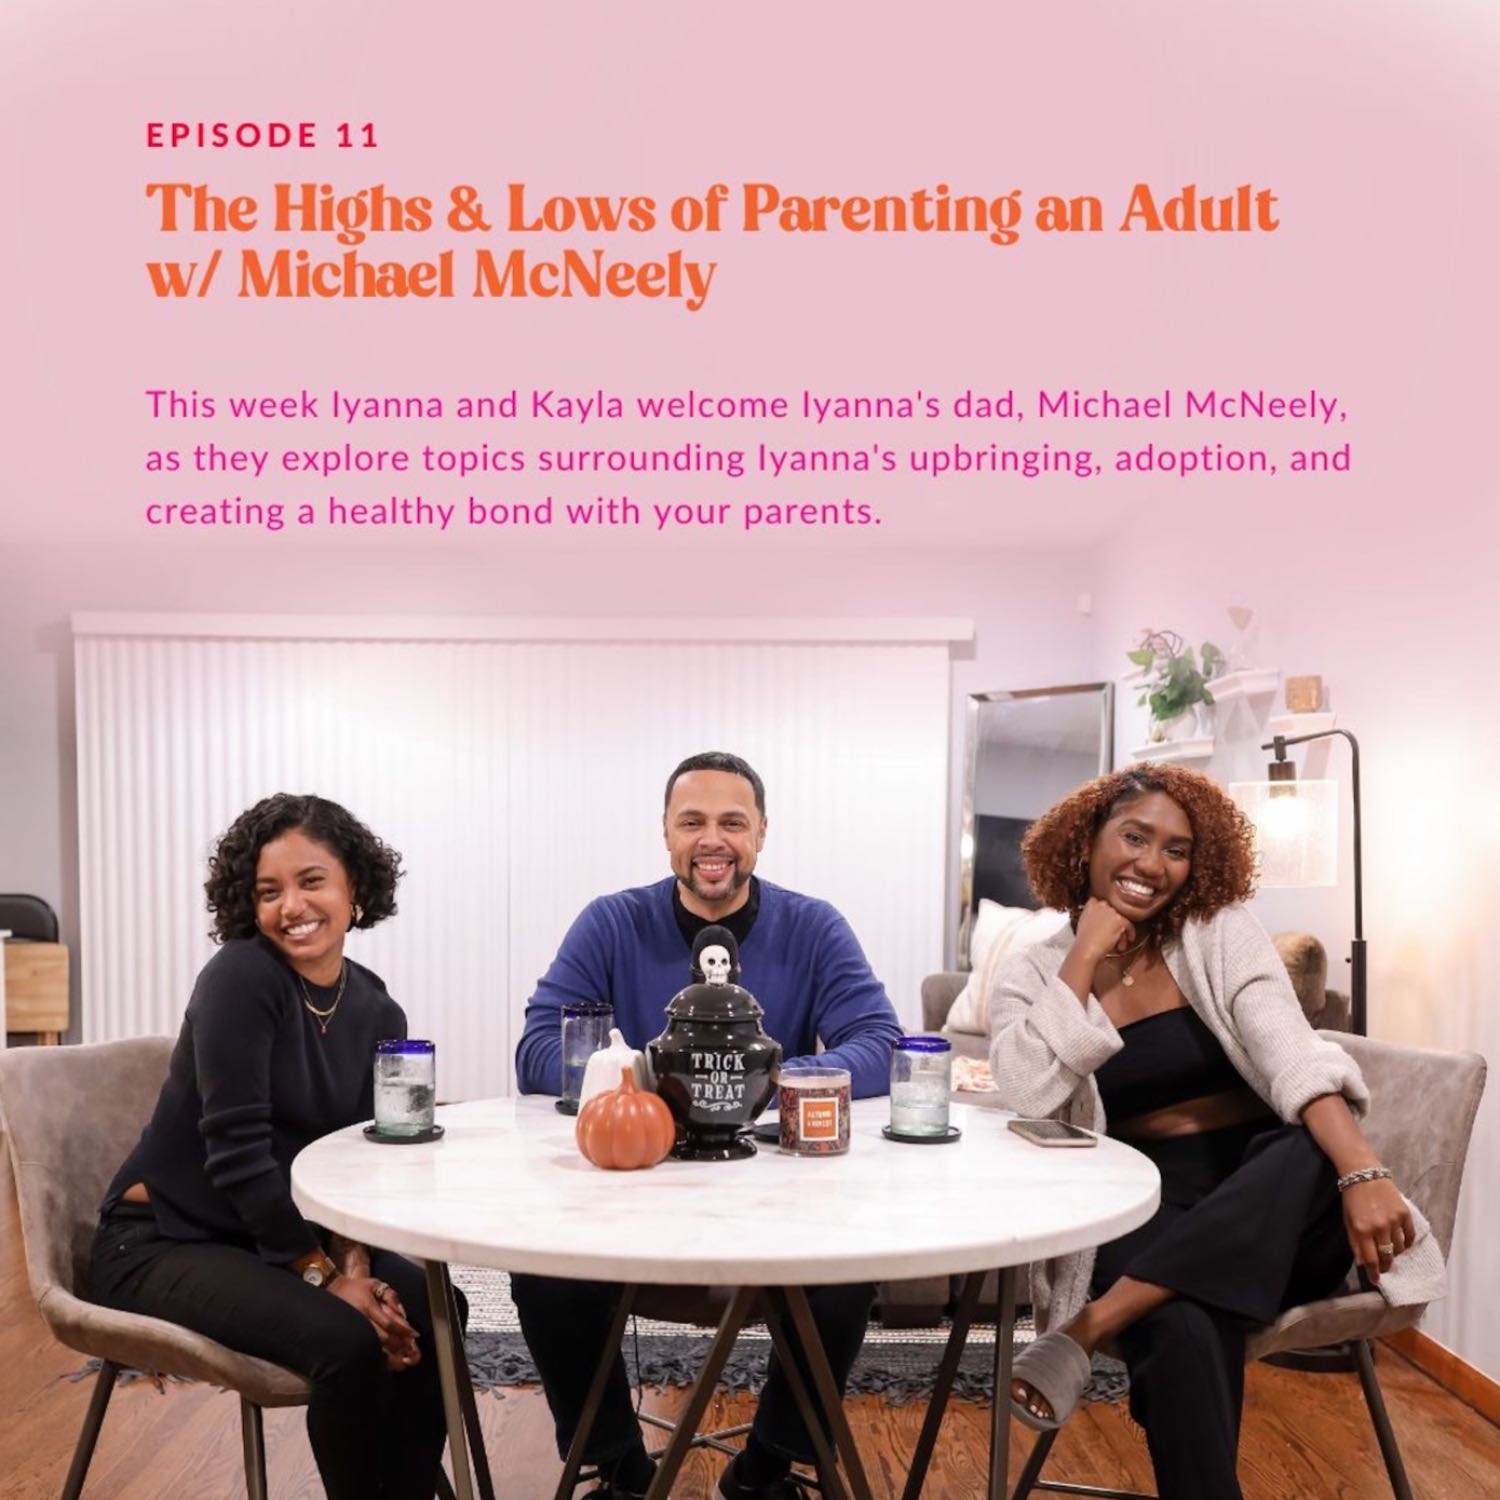 The Highs & Lows of Parenting an Adult w/ Michael McNeely